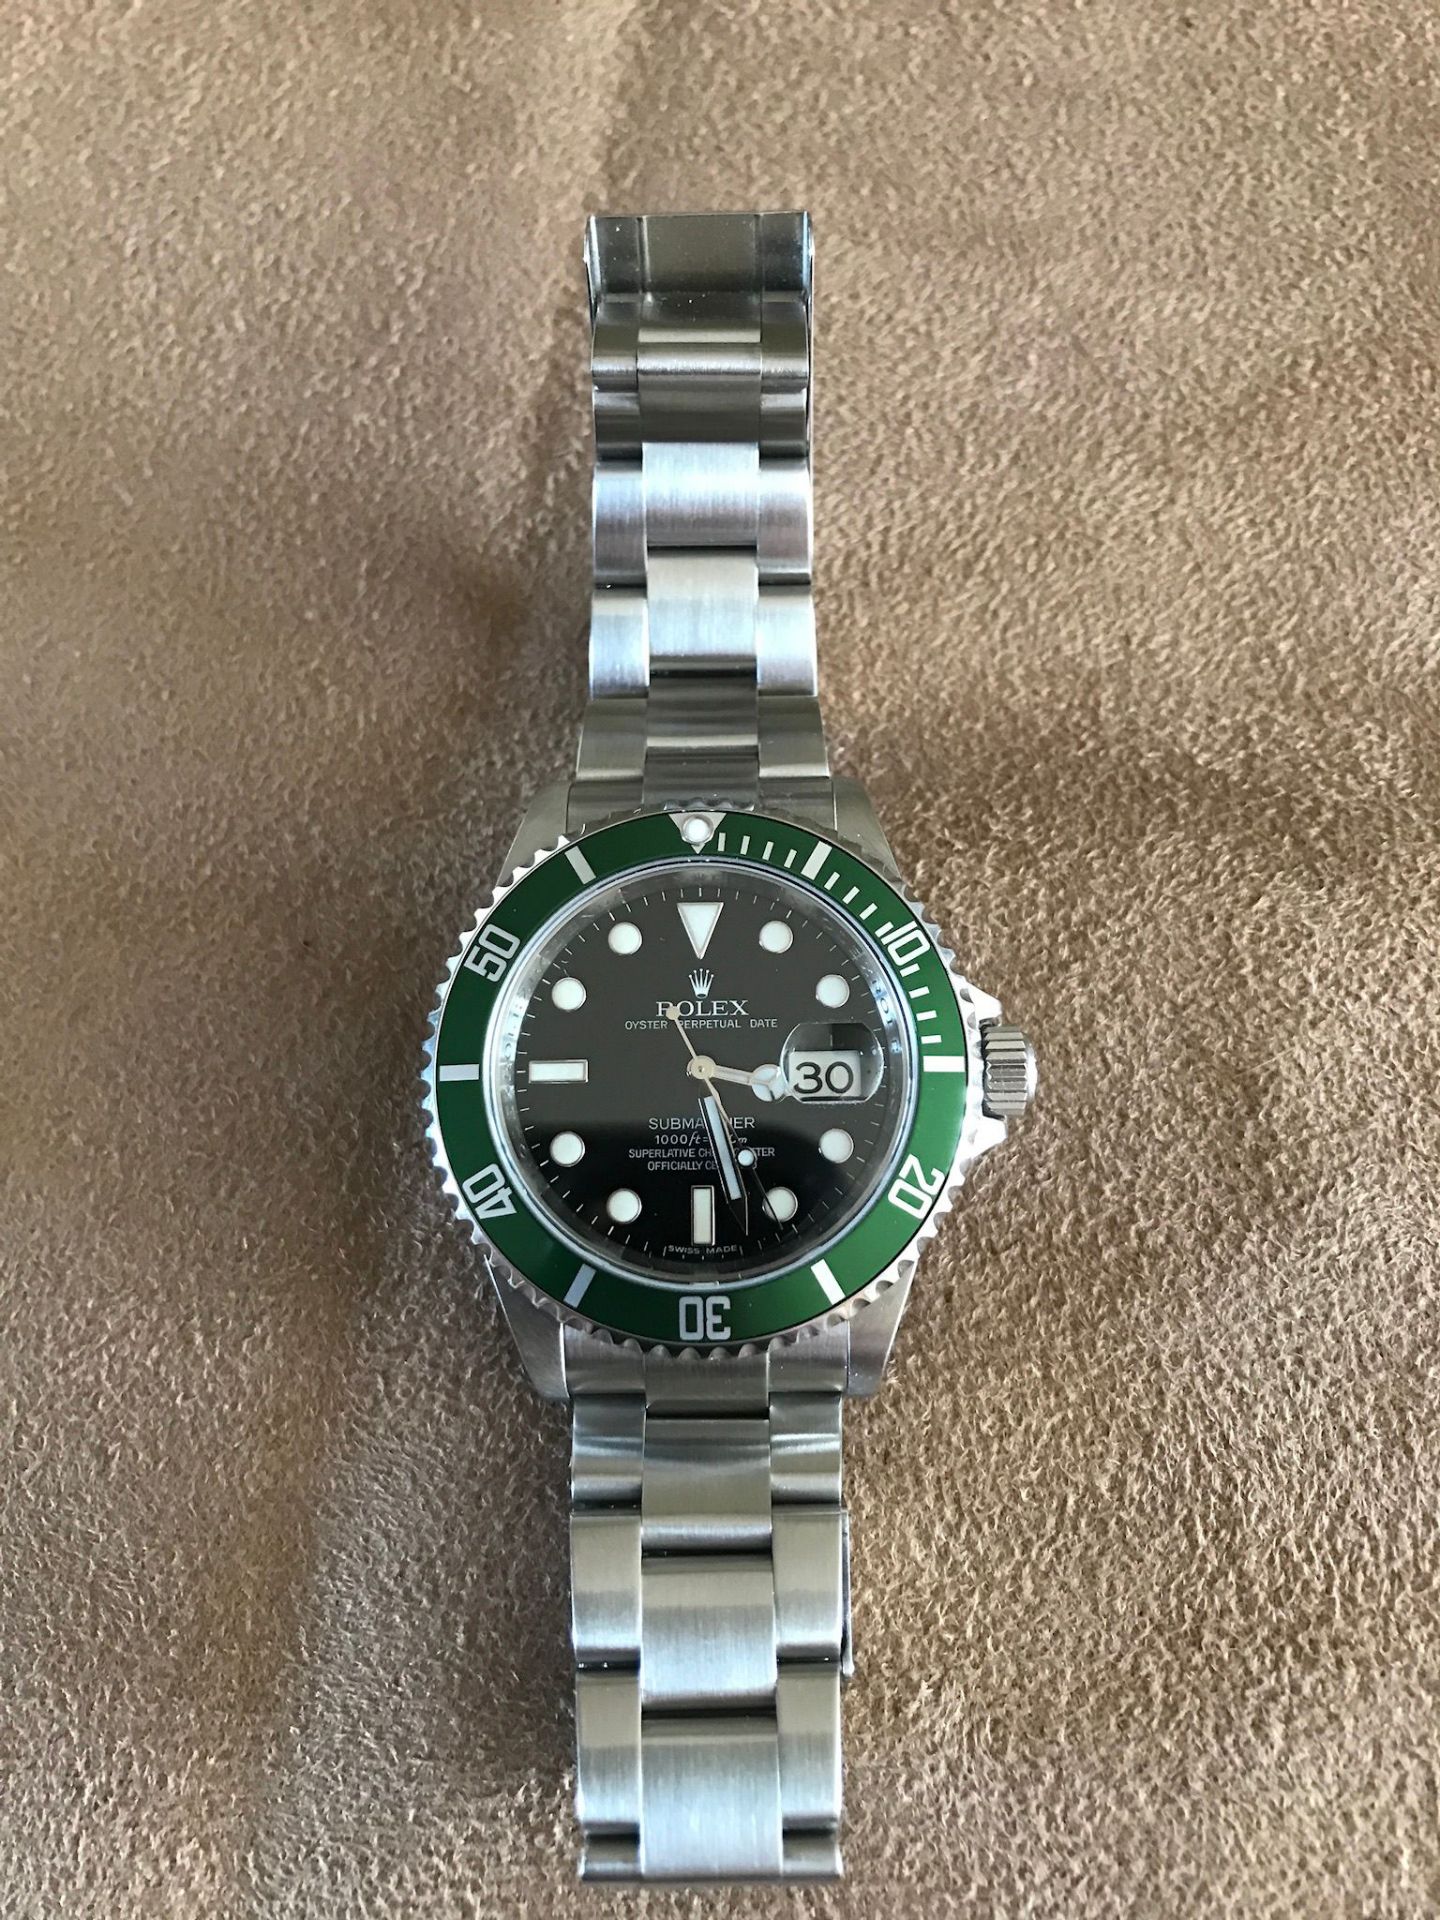 ROLEX SUBMARINER 50TH ANNIVERSARY (KERMIT) LIMITED SERIES - Image 5 of 10